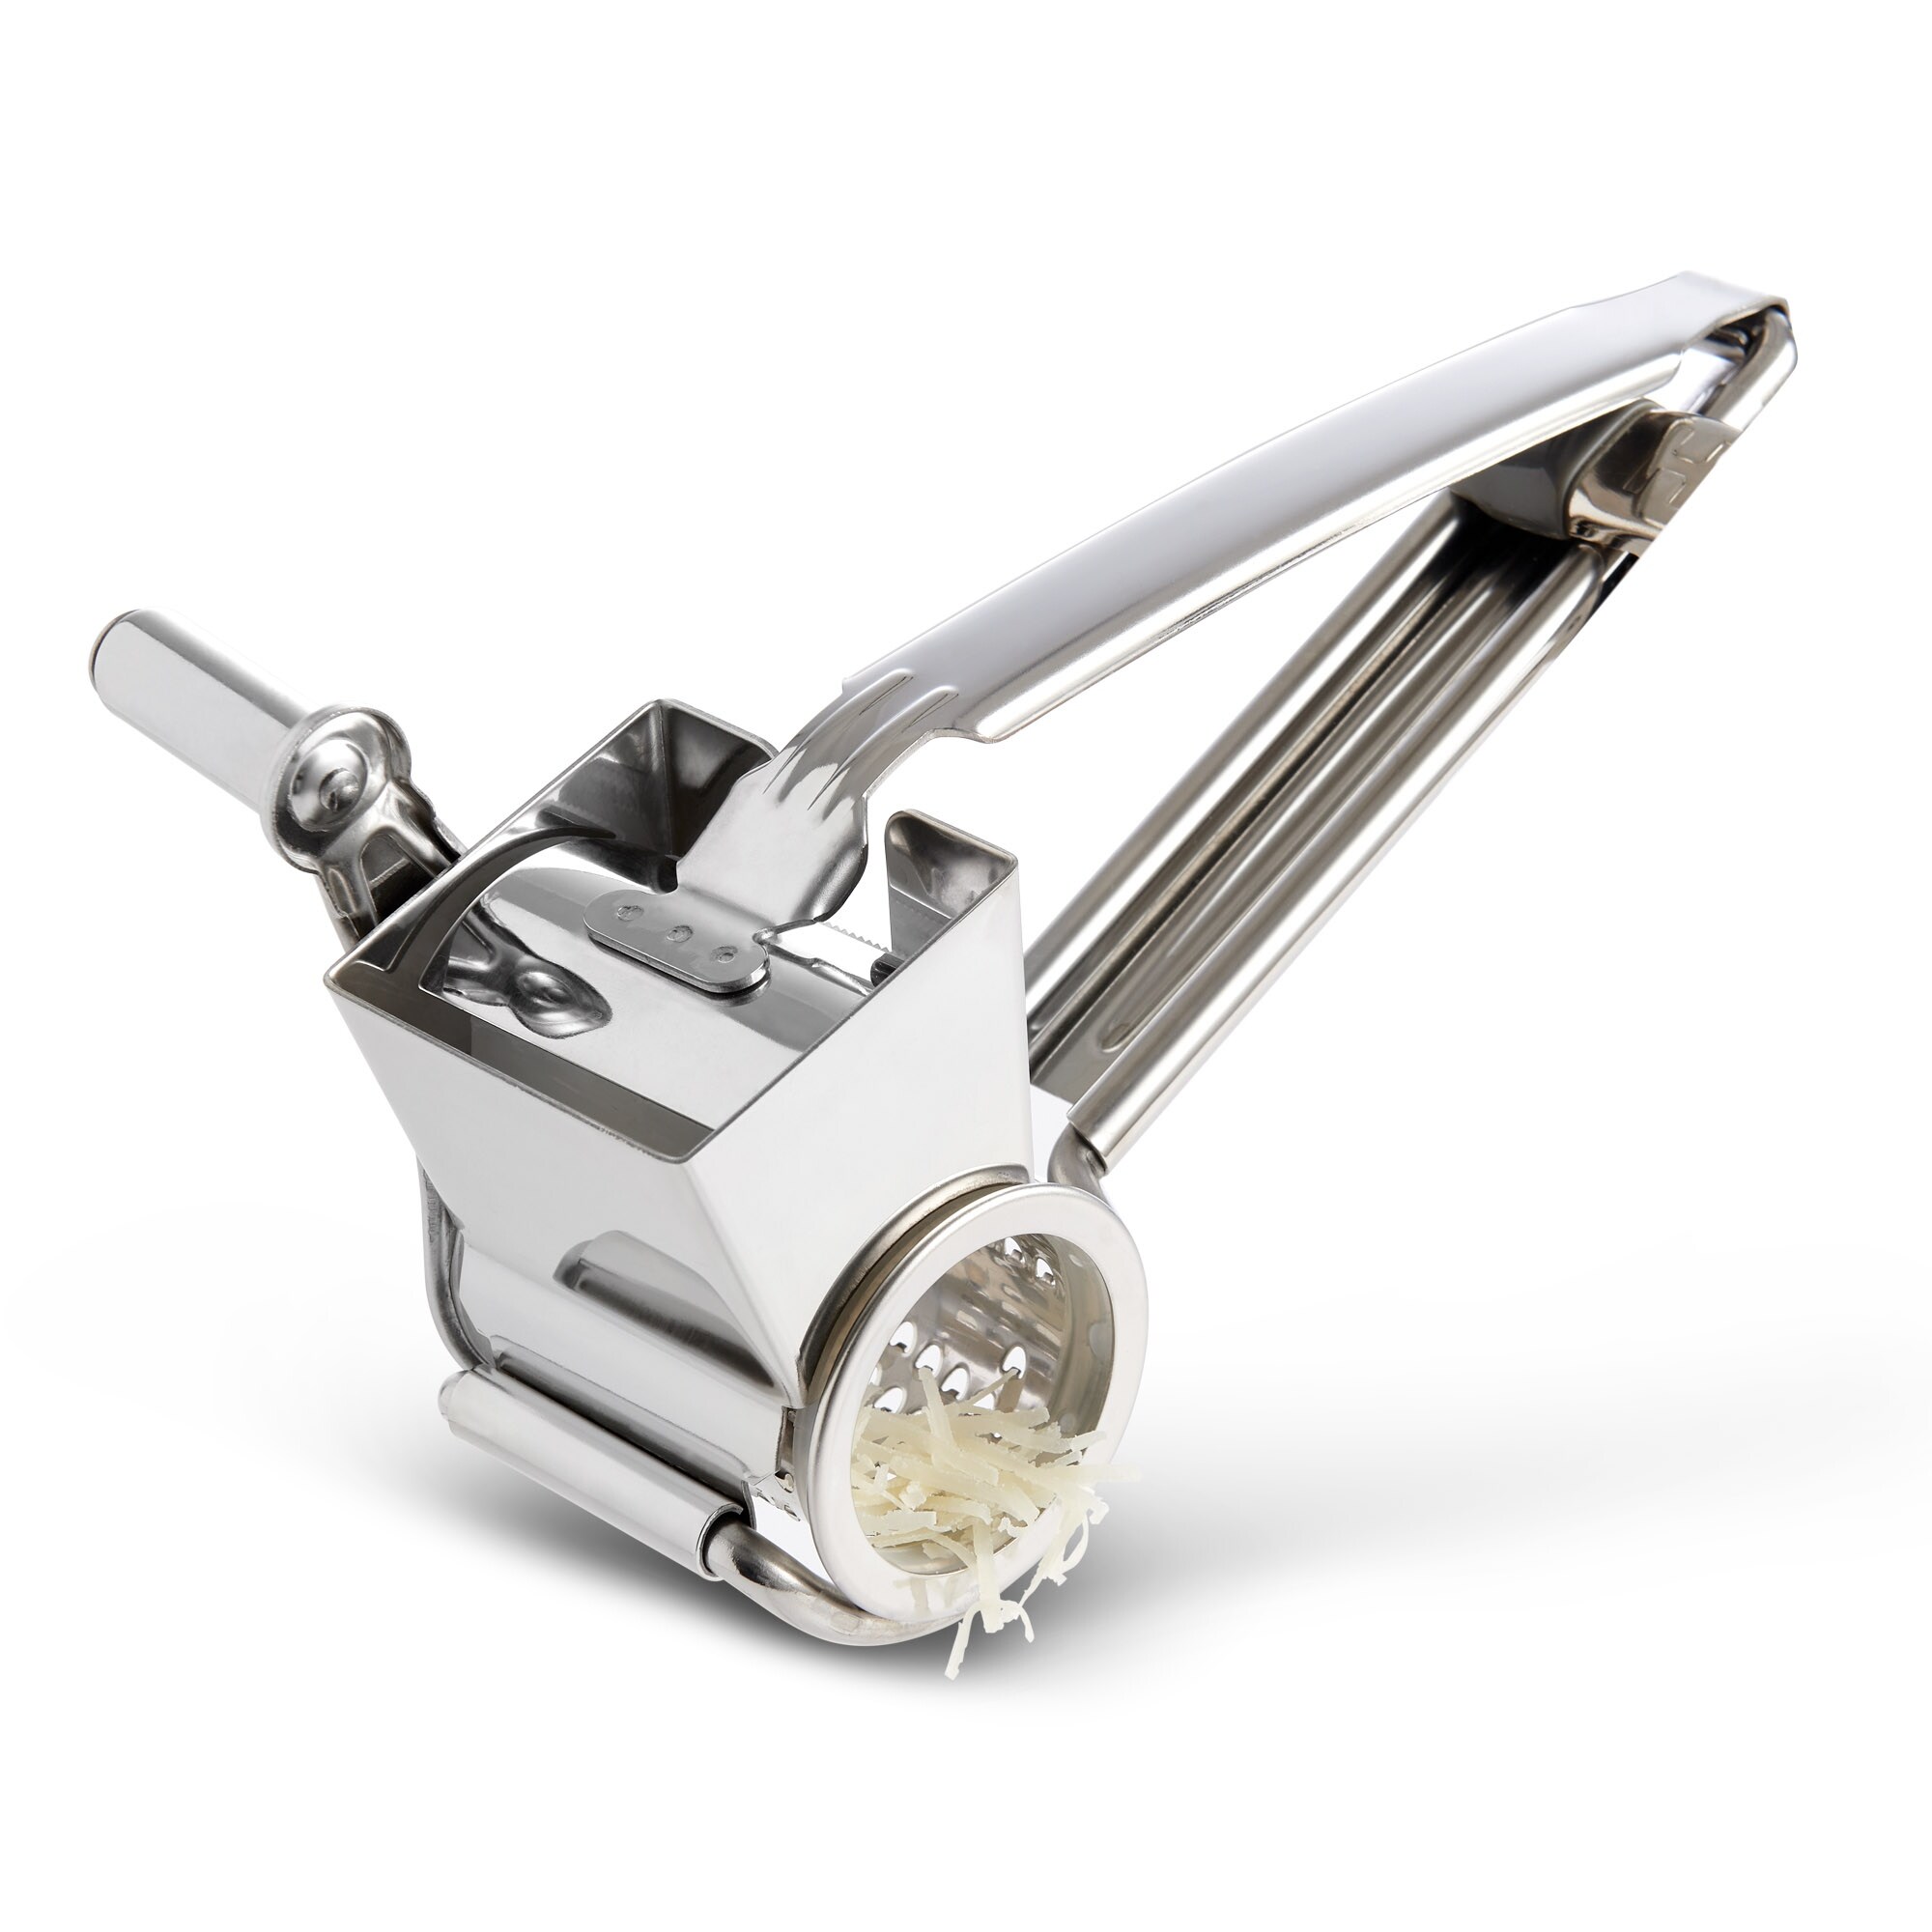 https://ak1.ostkcdn.com/images/products/is/images/direct/f45e9a175c09aabc685a841a6f7875e7a3301507/Fantes-Deluxe-Rotary-Cheese-Grater.jpg